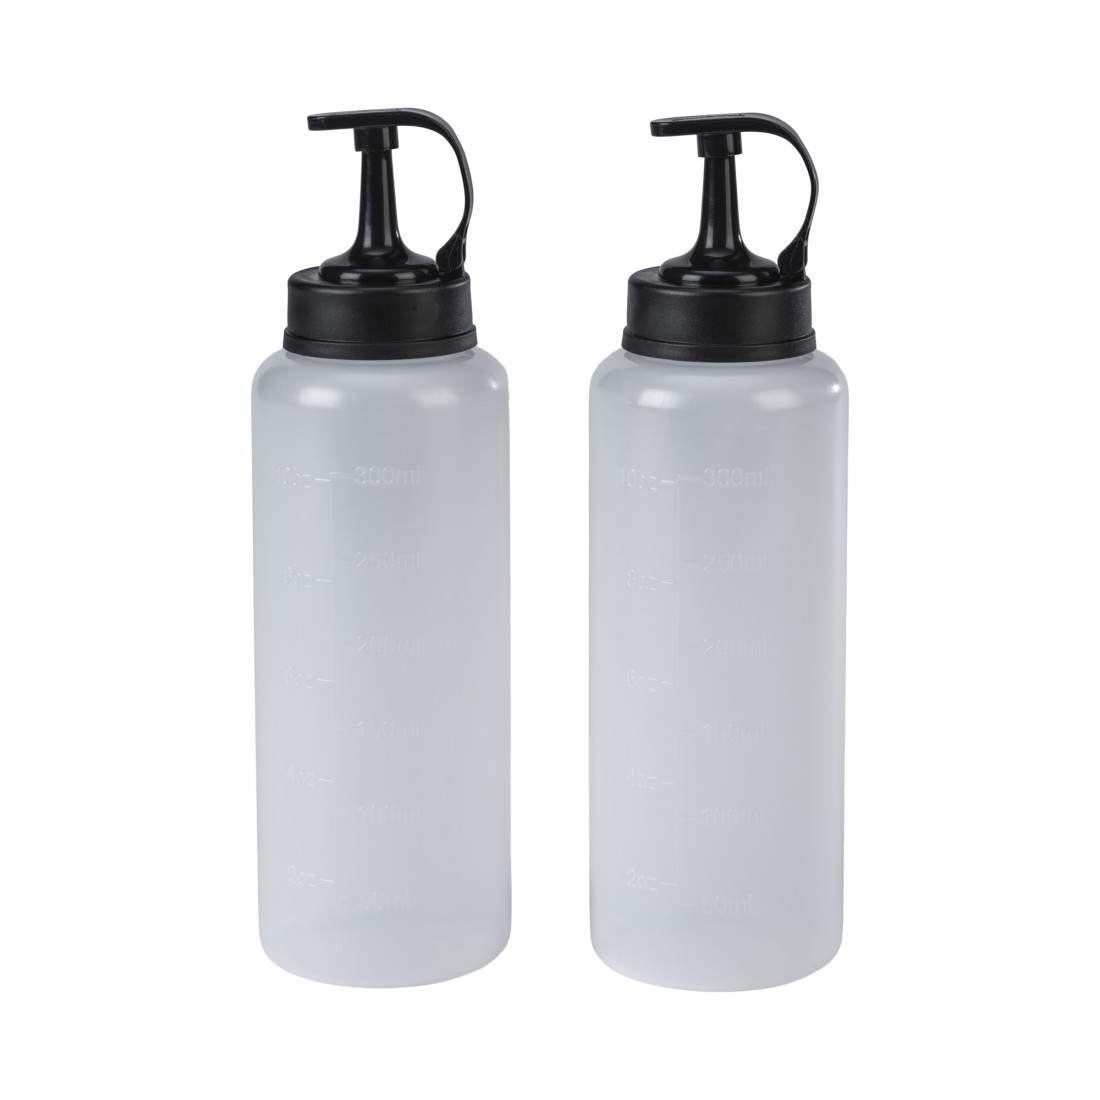 GoodCook Touch Squeeze Bottles, 2 pk - GoodCook